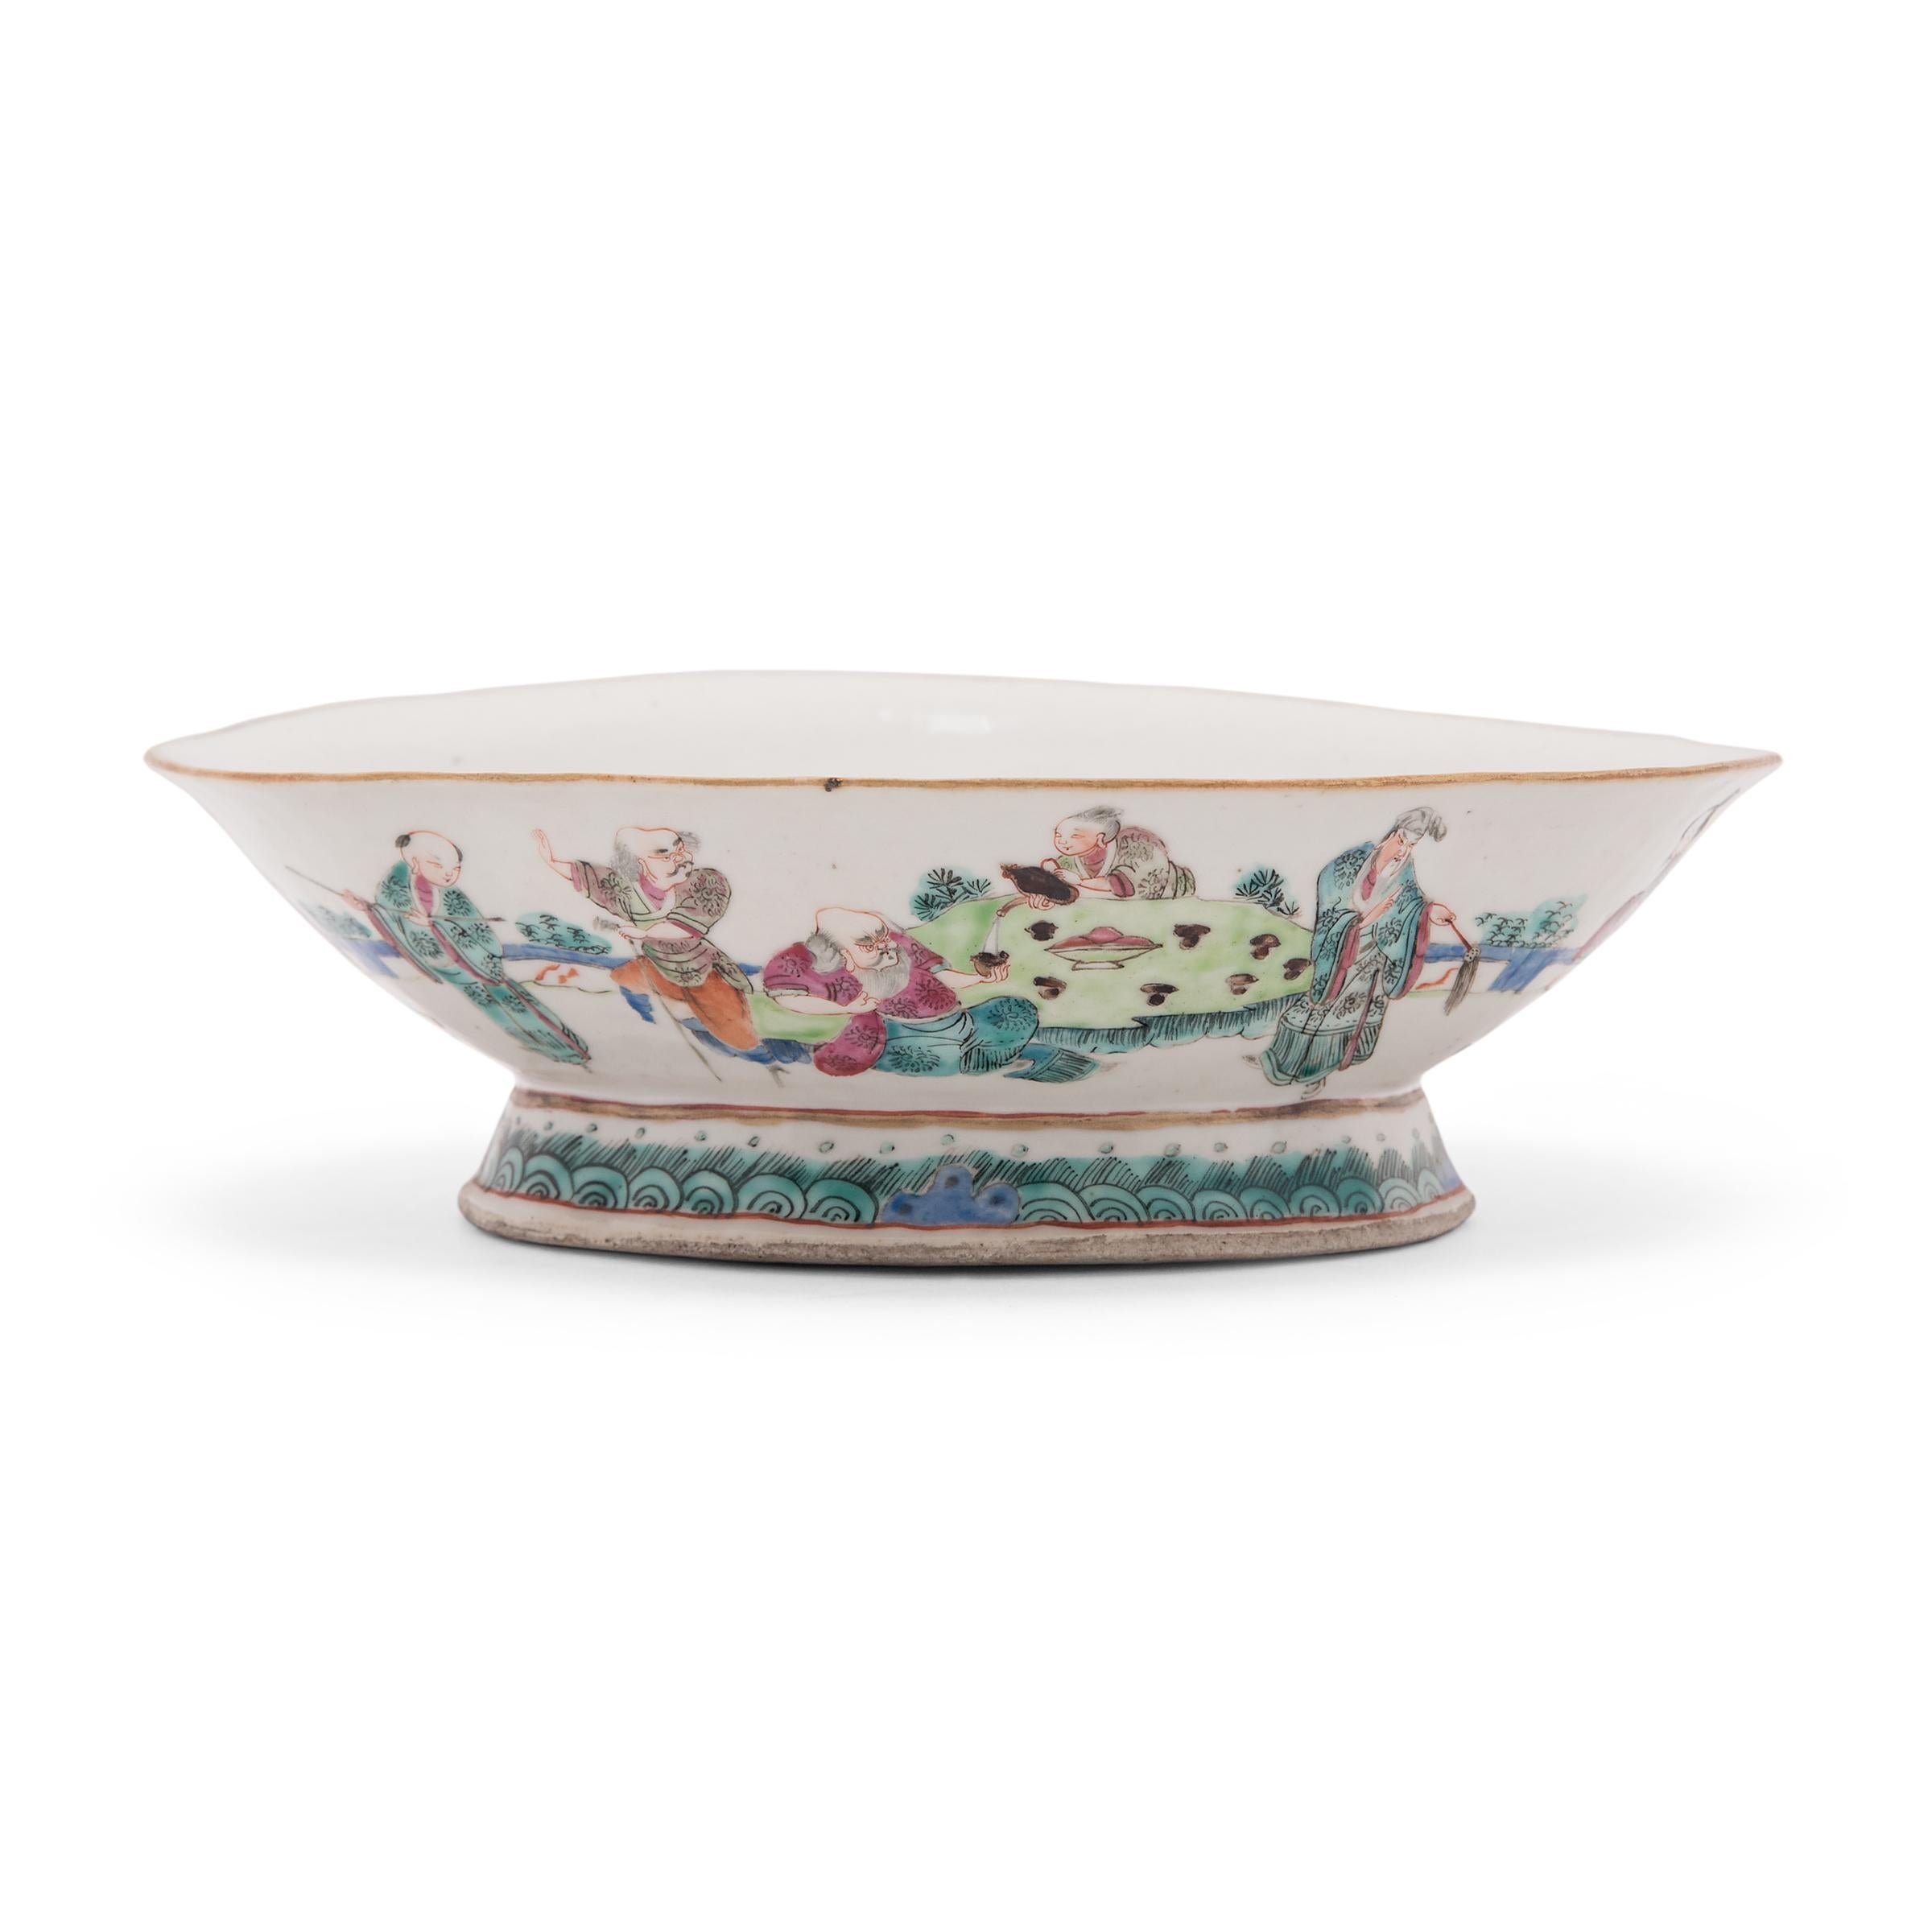 Qing Chinese Footed Offering Bowl with Gathering of Immortals, c. 1850